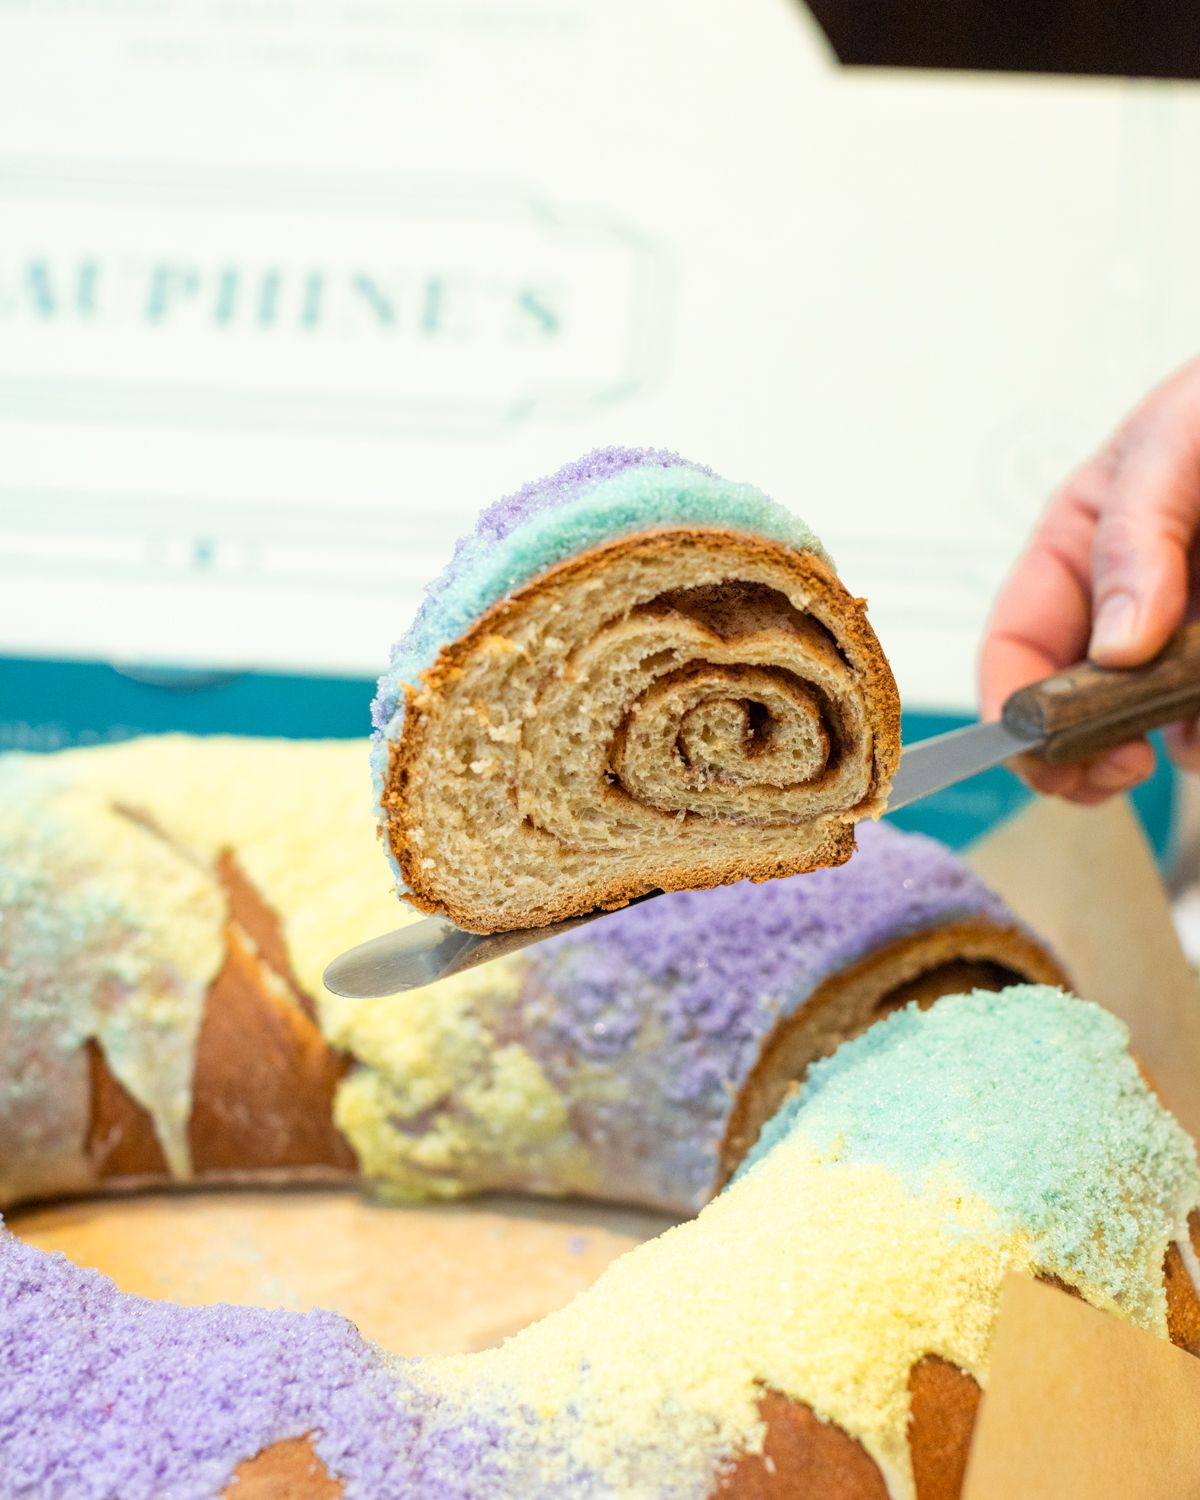 A king cake from Dauphine's.